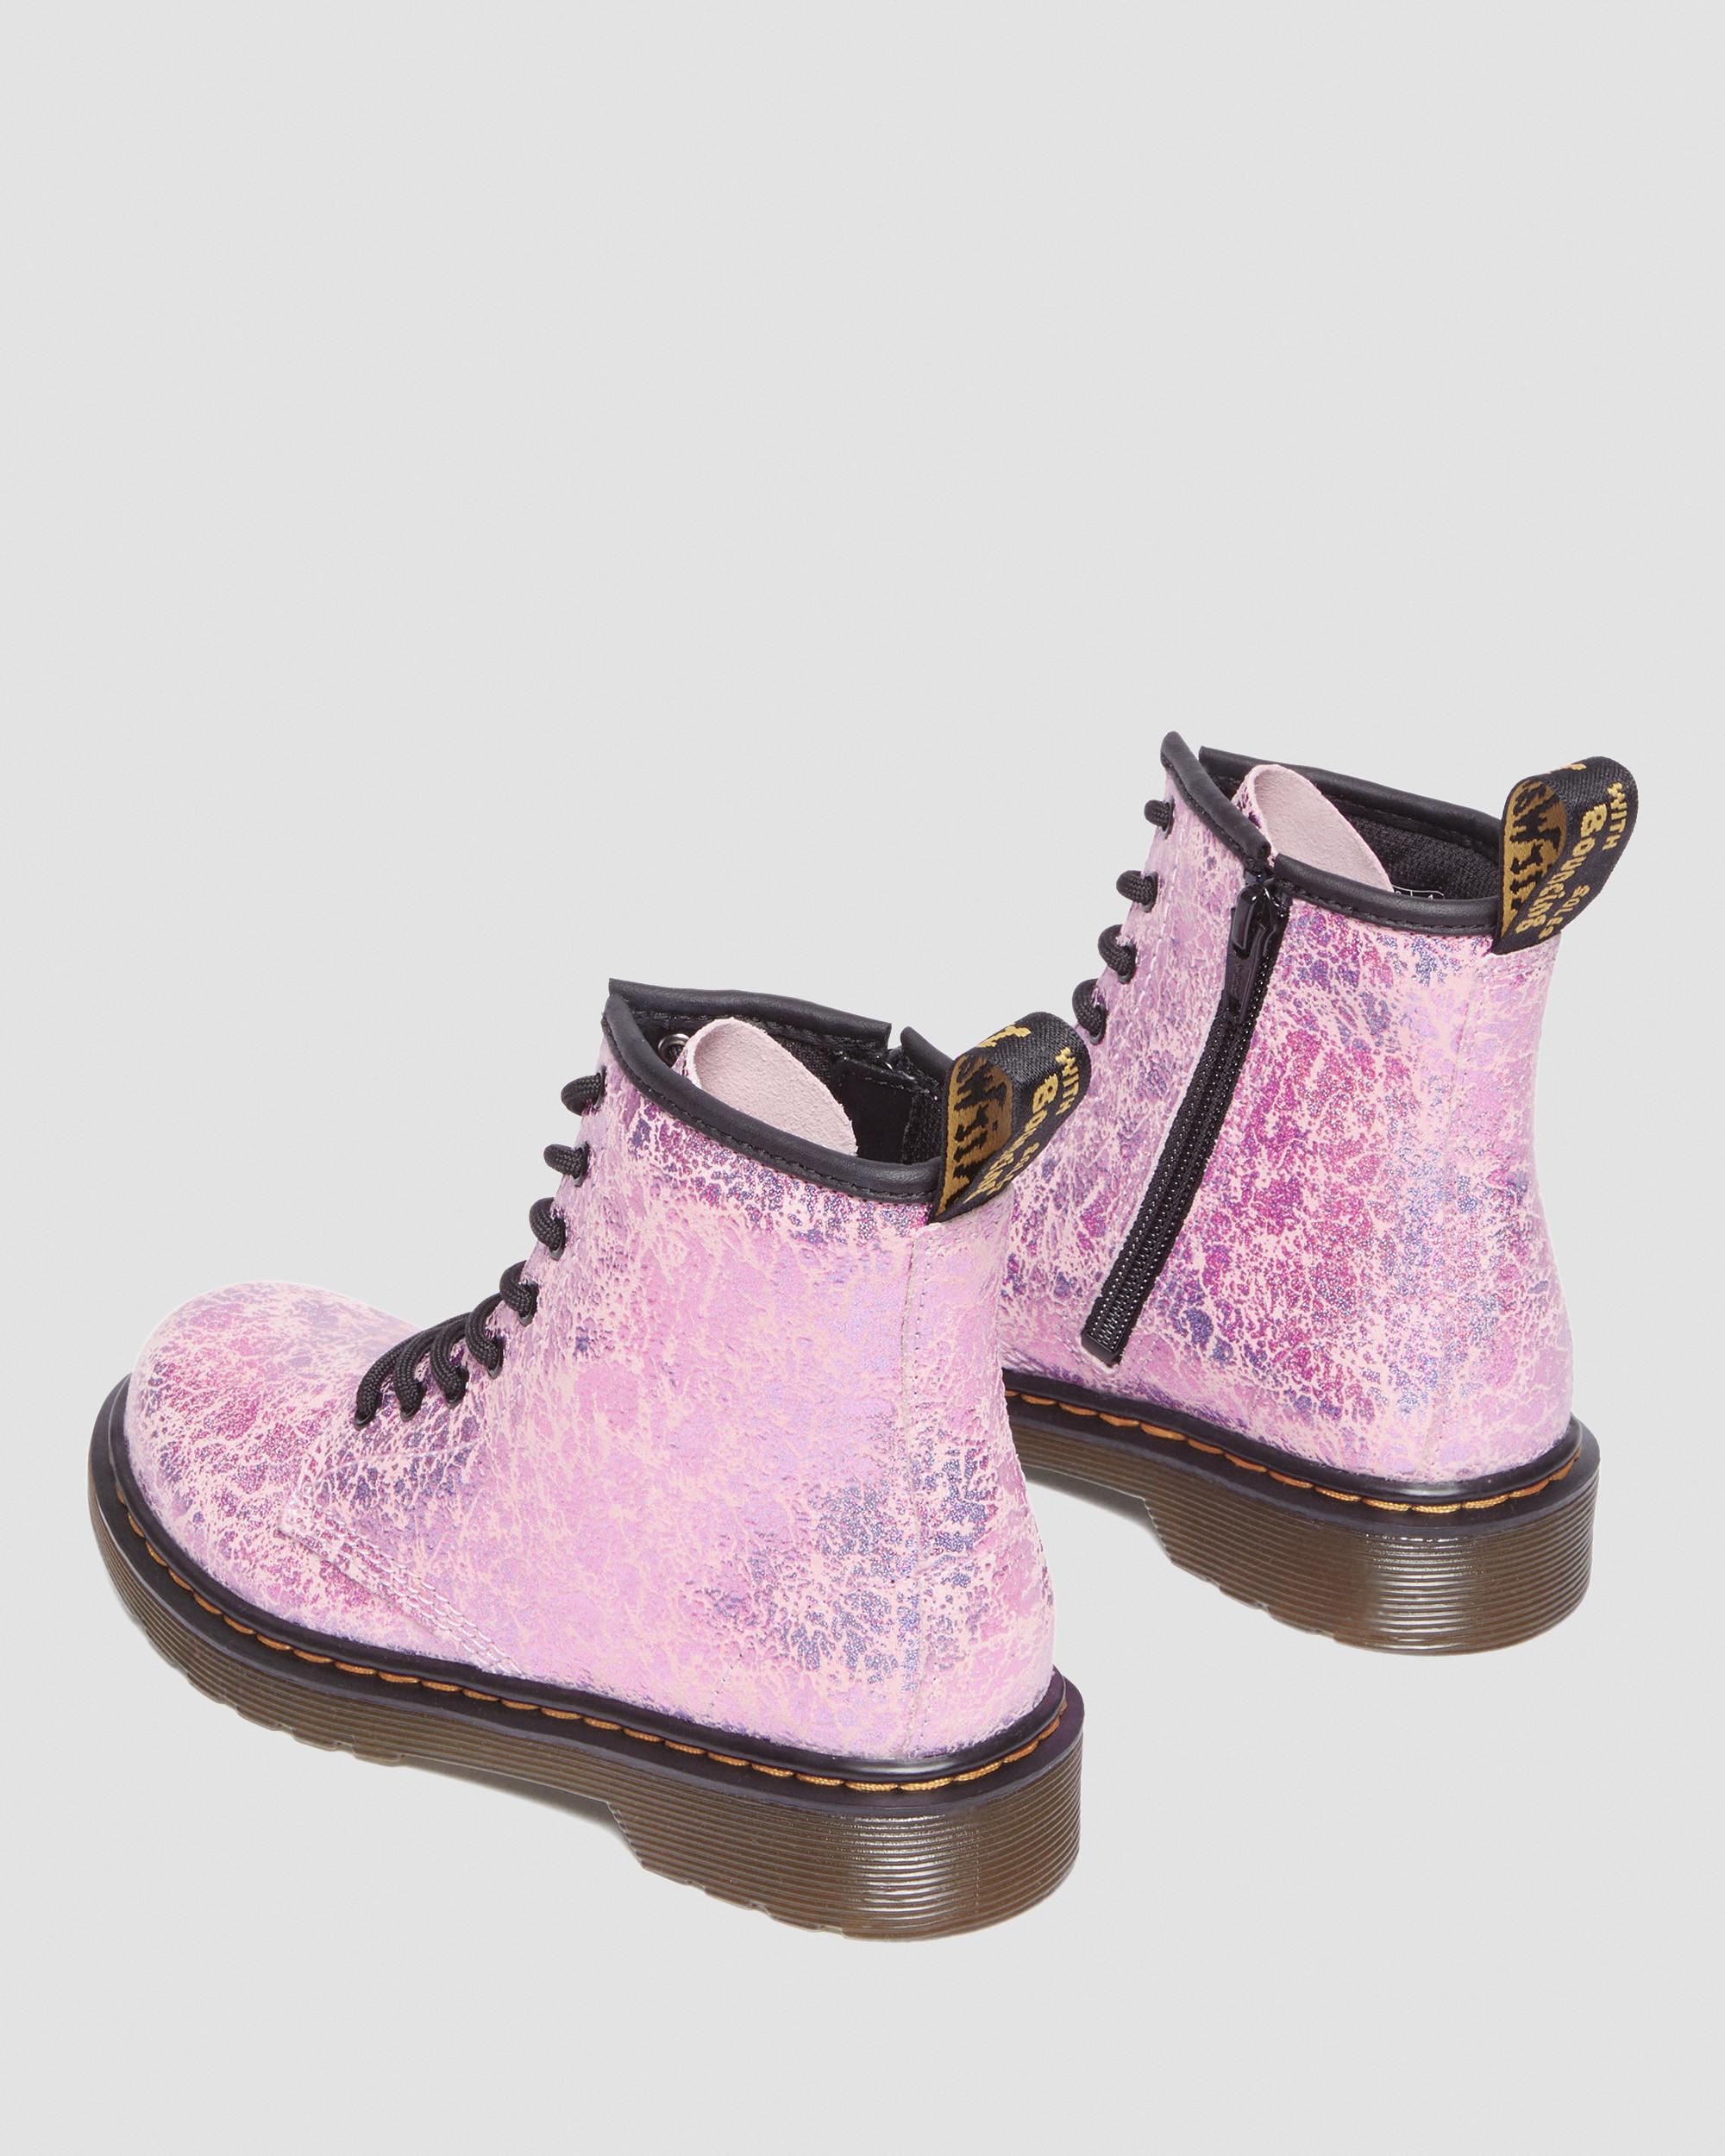 Junior 1460 Crinkle Metallic Lace Up Boots in Pink